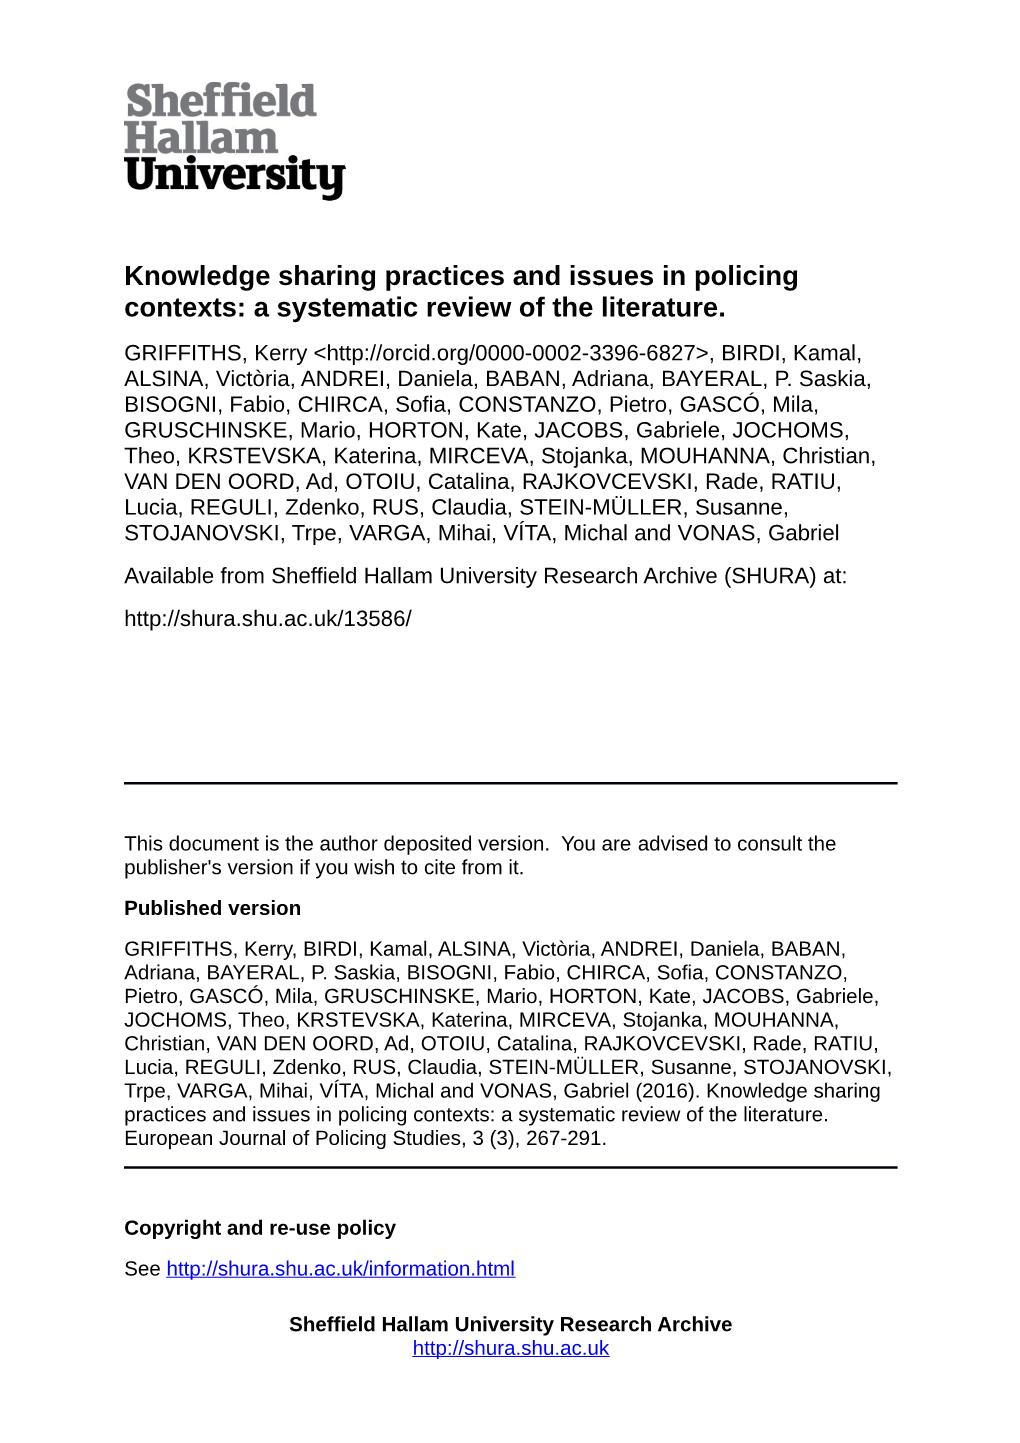 Knowledge Sharing Practices and Issues in Policing Contexts: a Systematic Review of the Literature